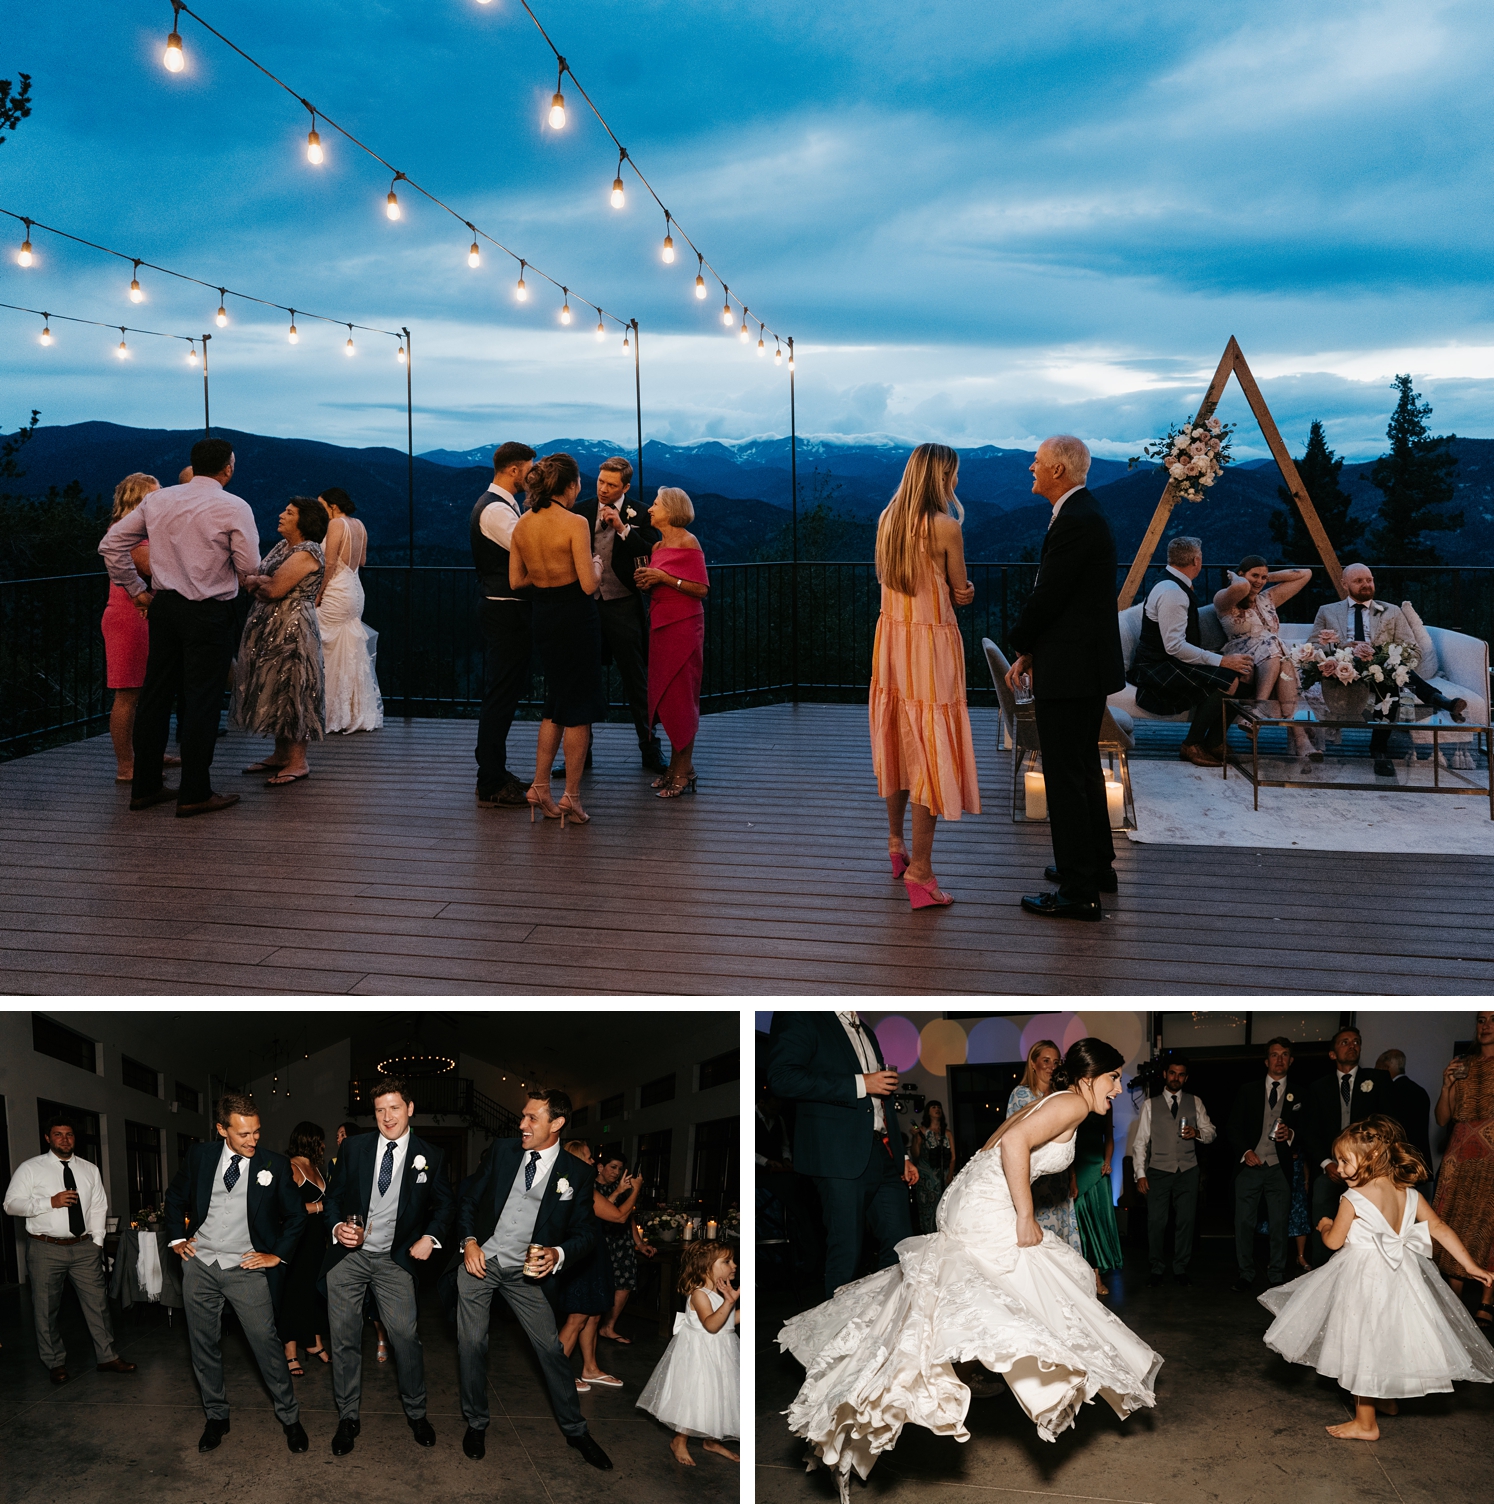 Wedding guests standing on deck overlooking mountains at North Star Gatherings | Groom and groomsmen dancing at reception | bride dancing with flower girl | McArthur Weddings and Events